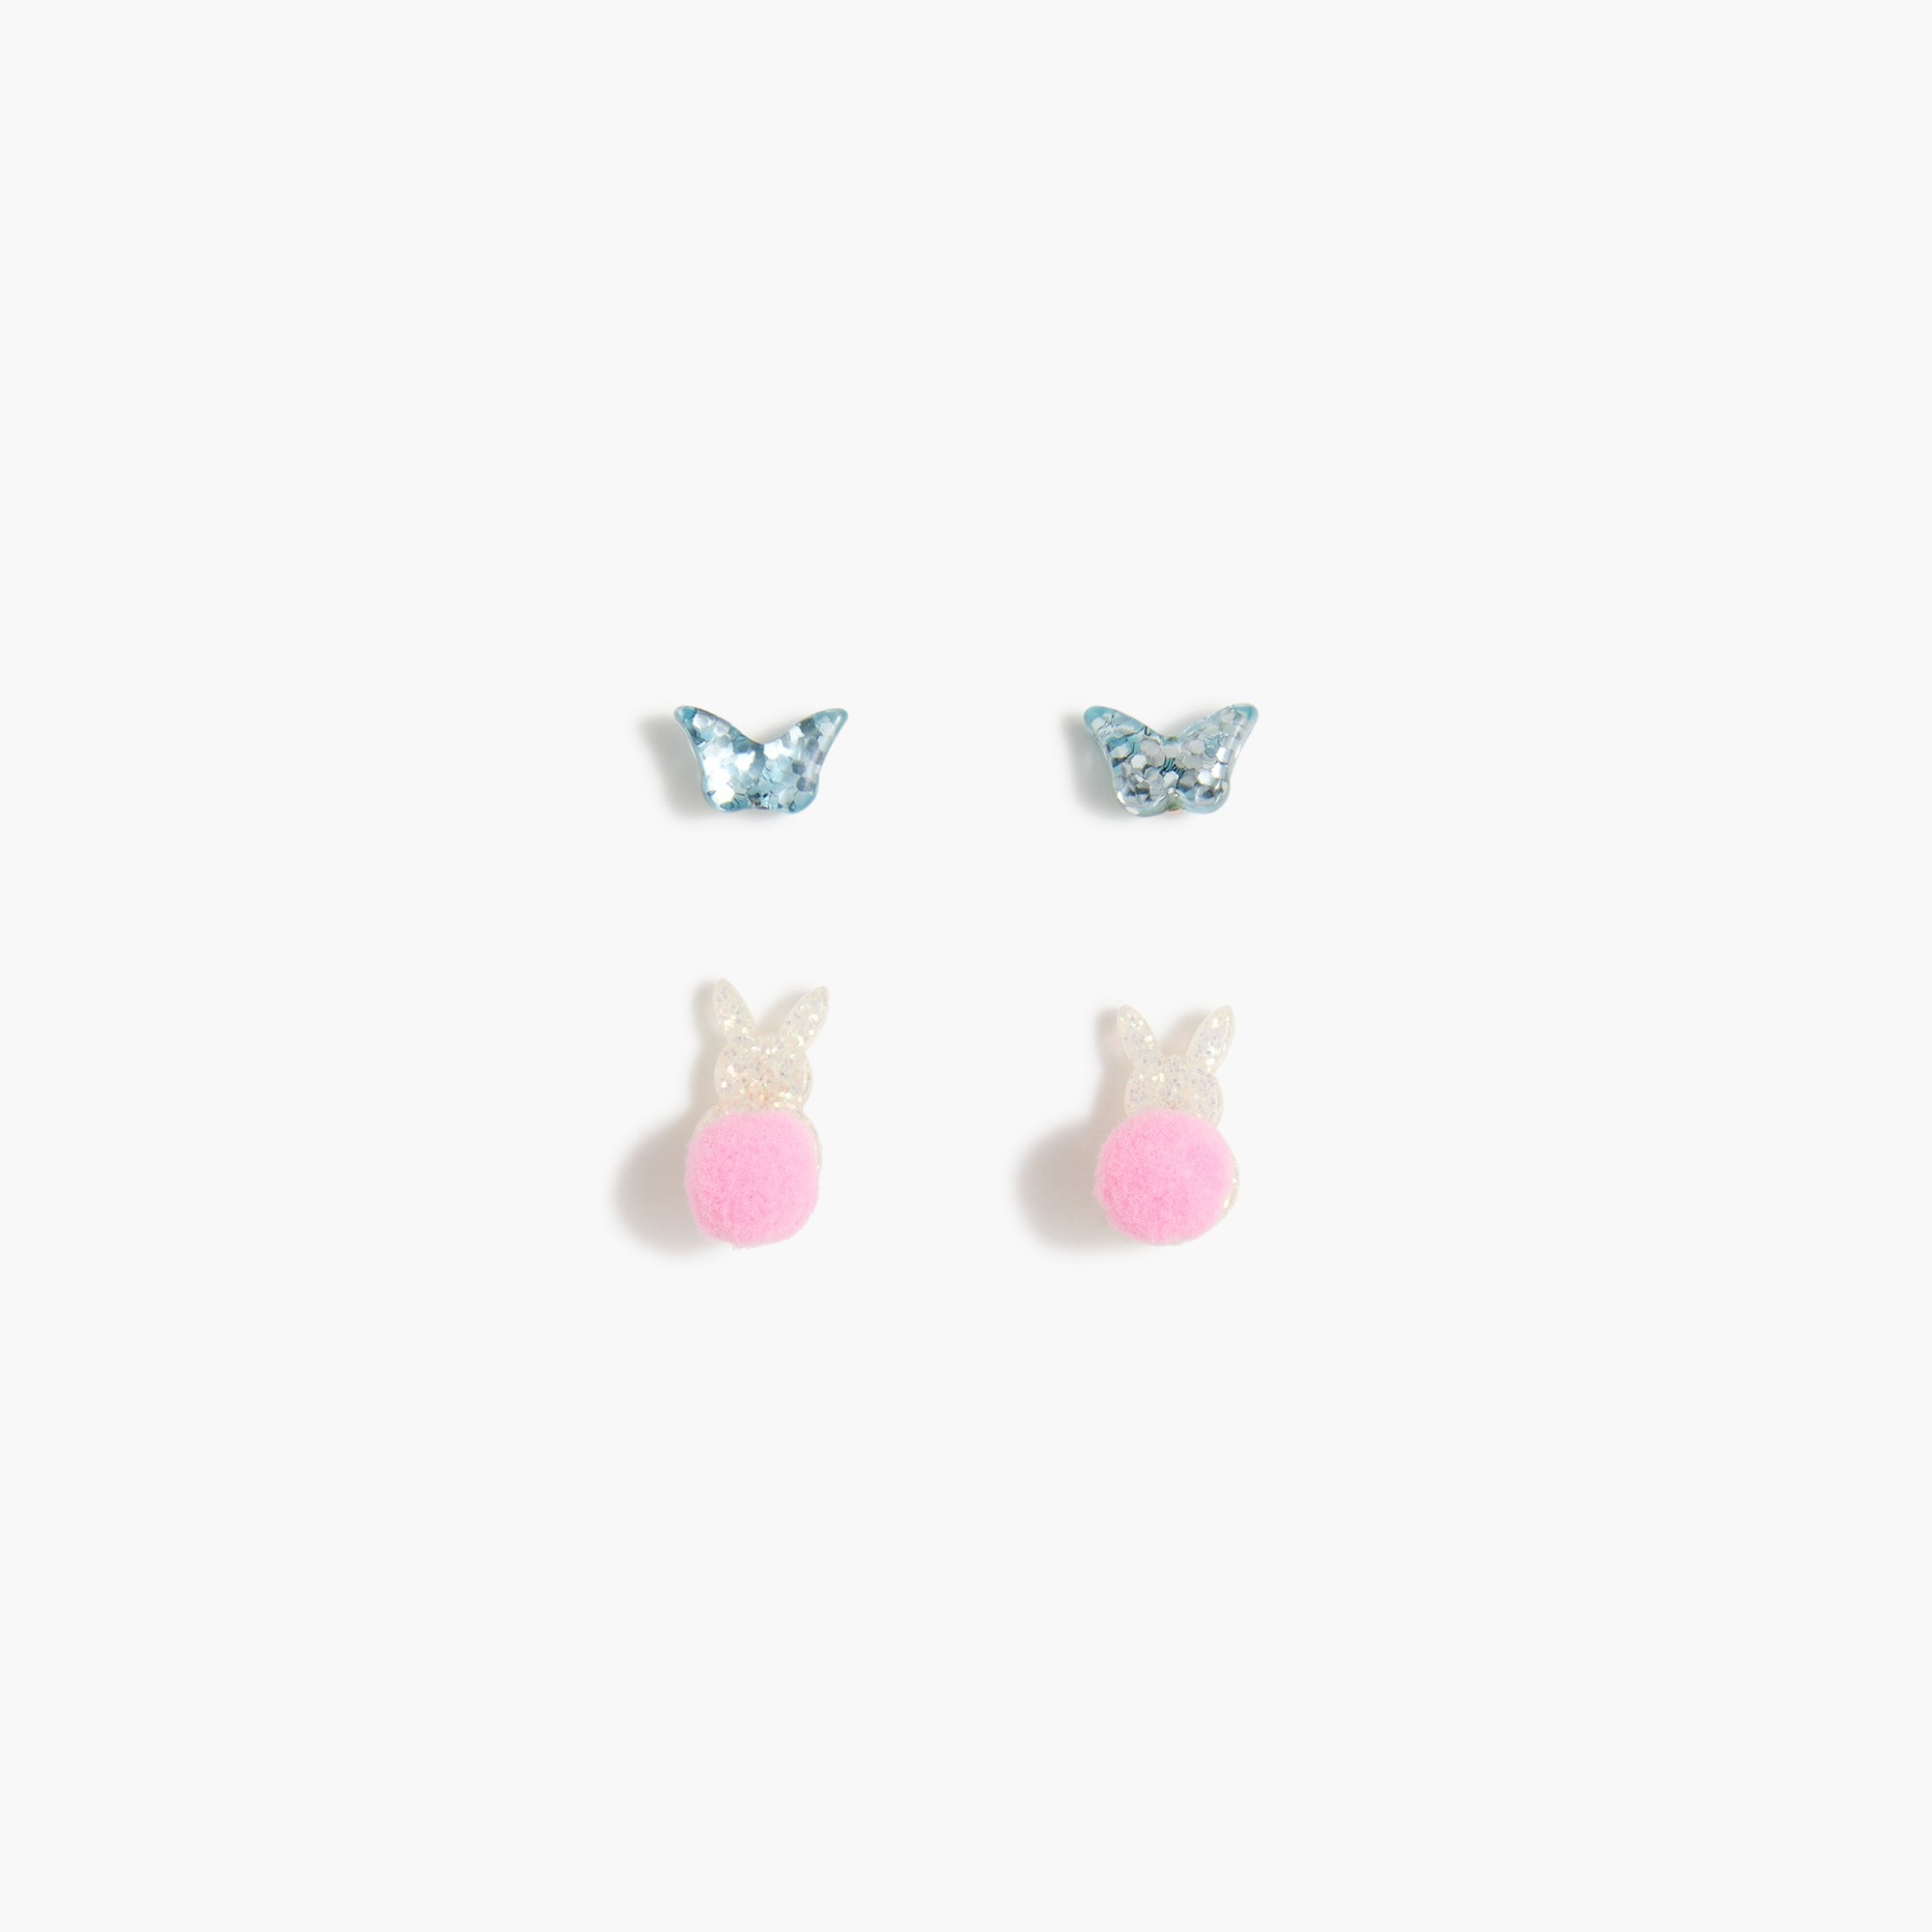 Girls' bunny and butterfly earrings set-of two